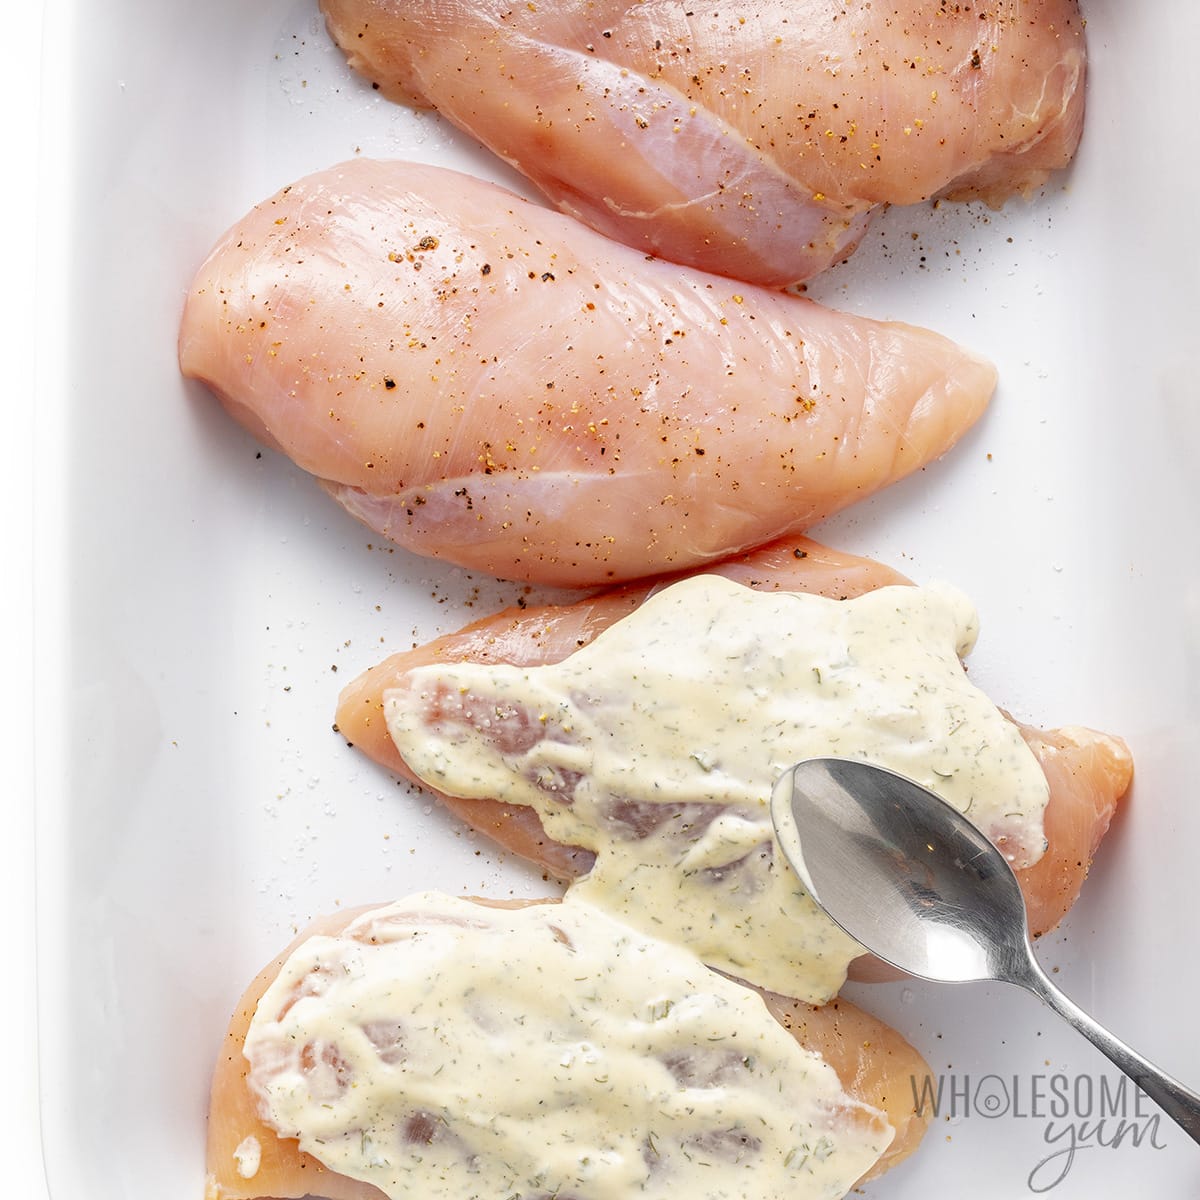 Season the chicken with salt and pepper and top with ranch dressing.